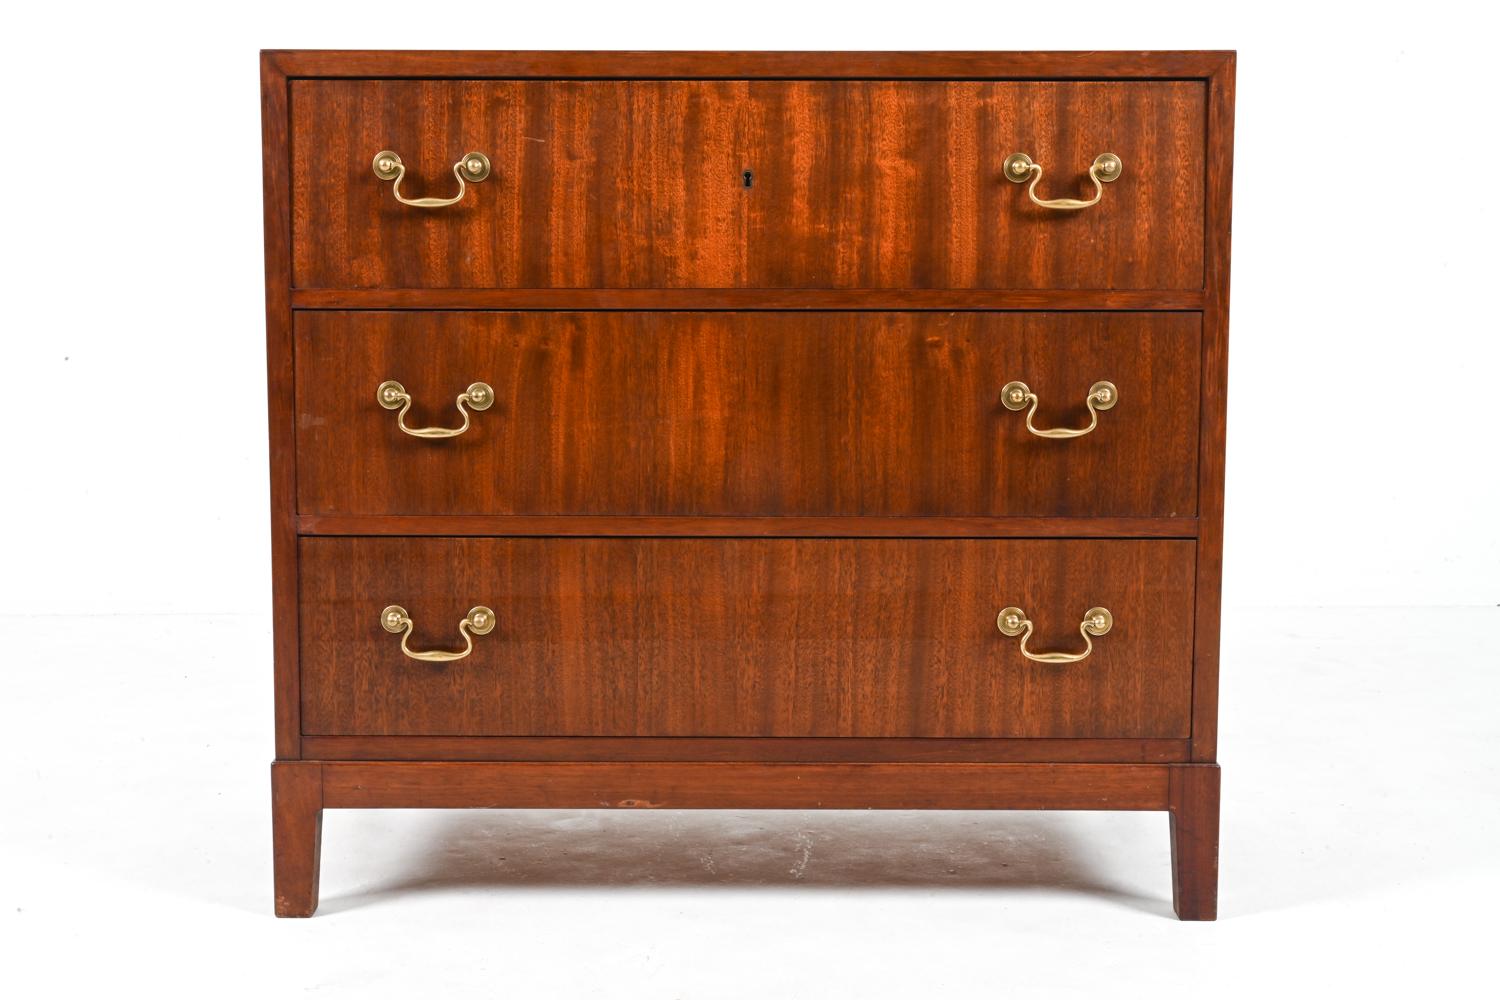 Danish Rare Mahogany Three-Drawer Chest by Ole Wanscher for A. J. Iversen, c. 1940's For Sale